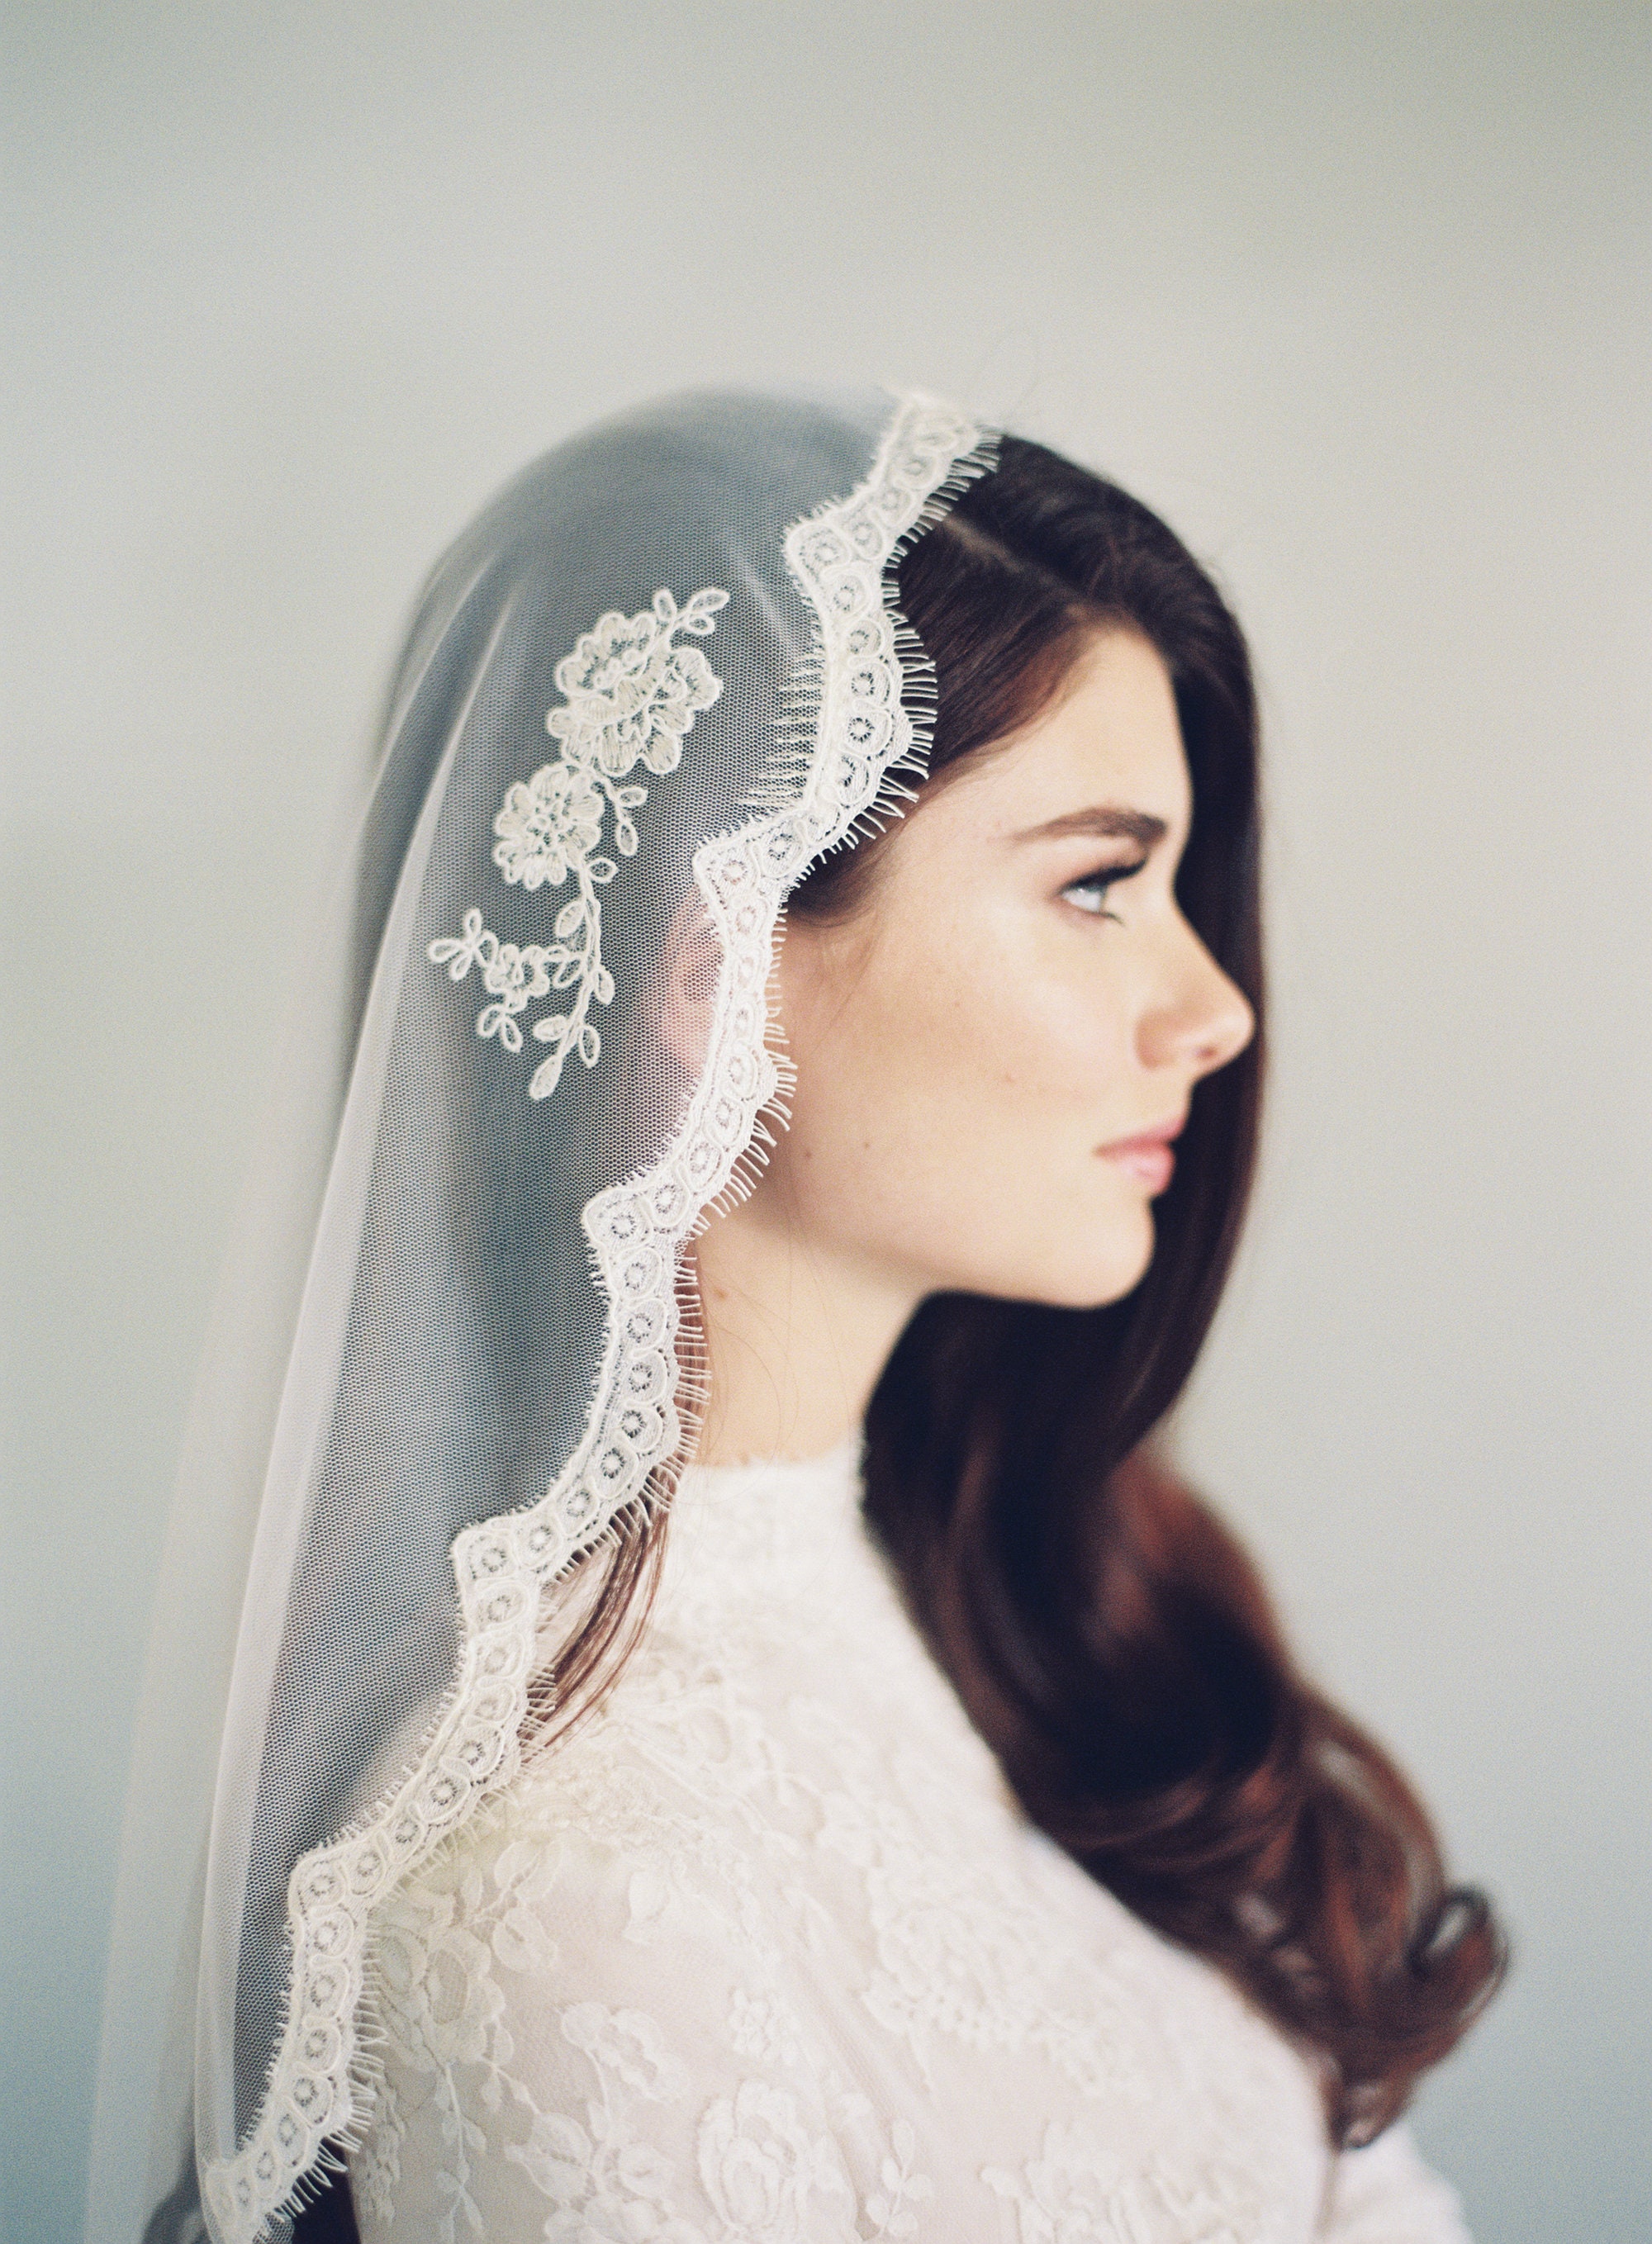 Women Pure white Bride Wedding Wedding Frilly lace Hair head Veil WITH COMB 